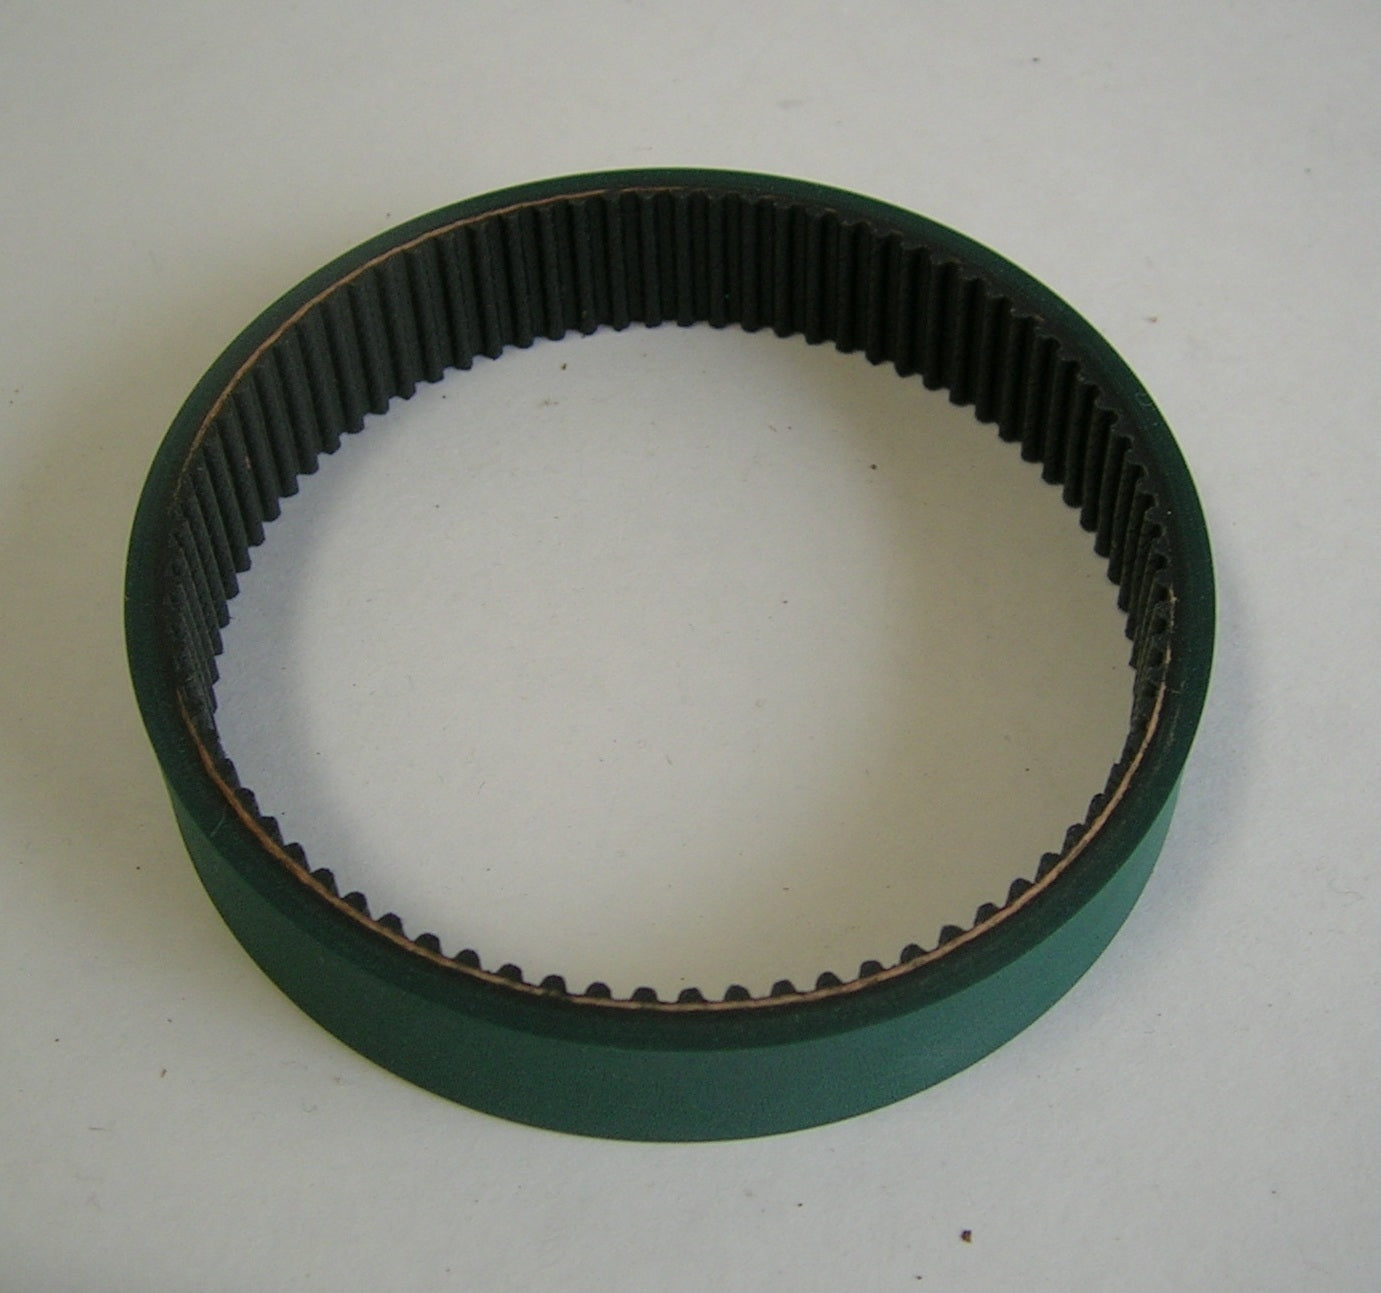 PF-2000 Toothed Replacement Grabber Feed Belt for Schleuniger PF-2000 PF2-3065, Green